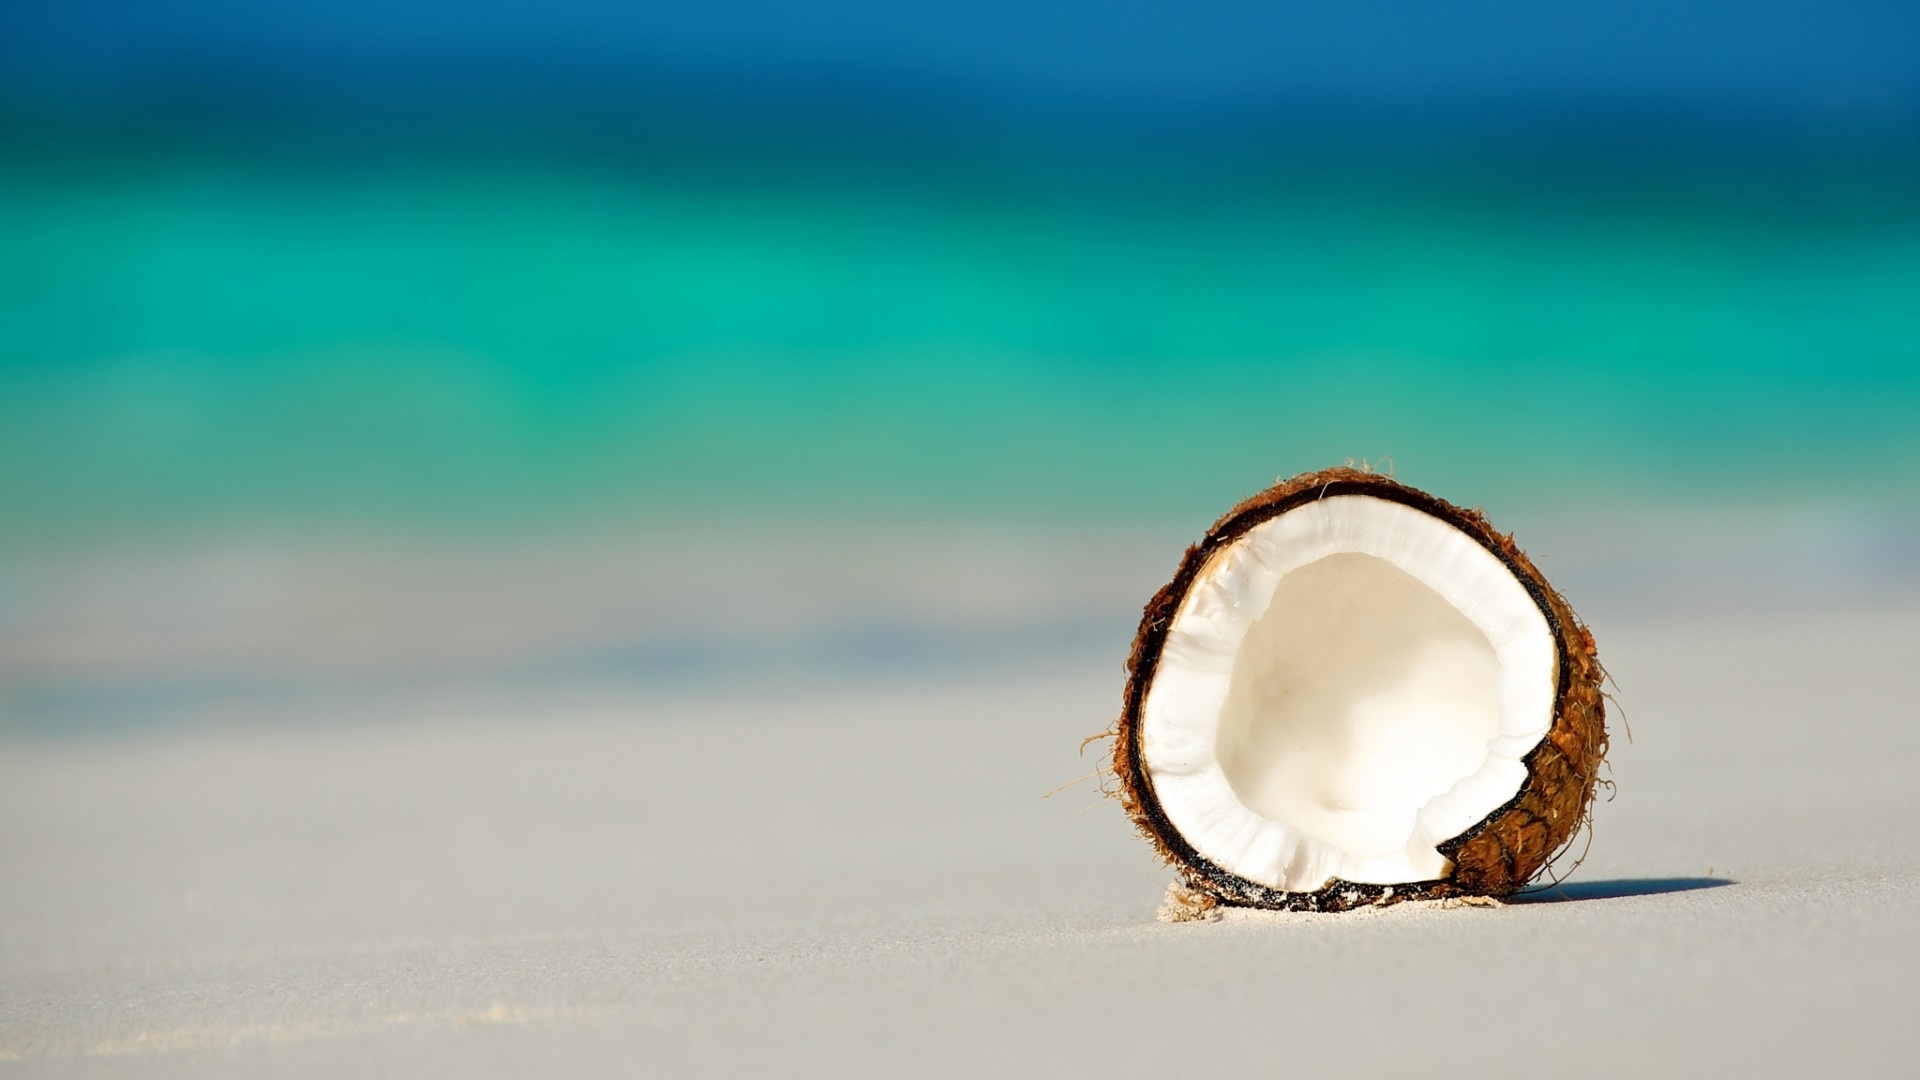 Coconuts By The Sea windows background